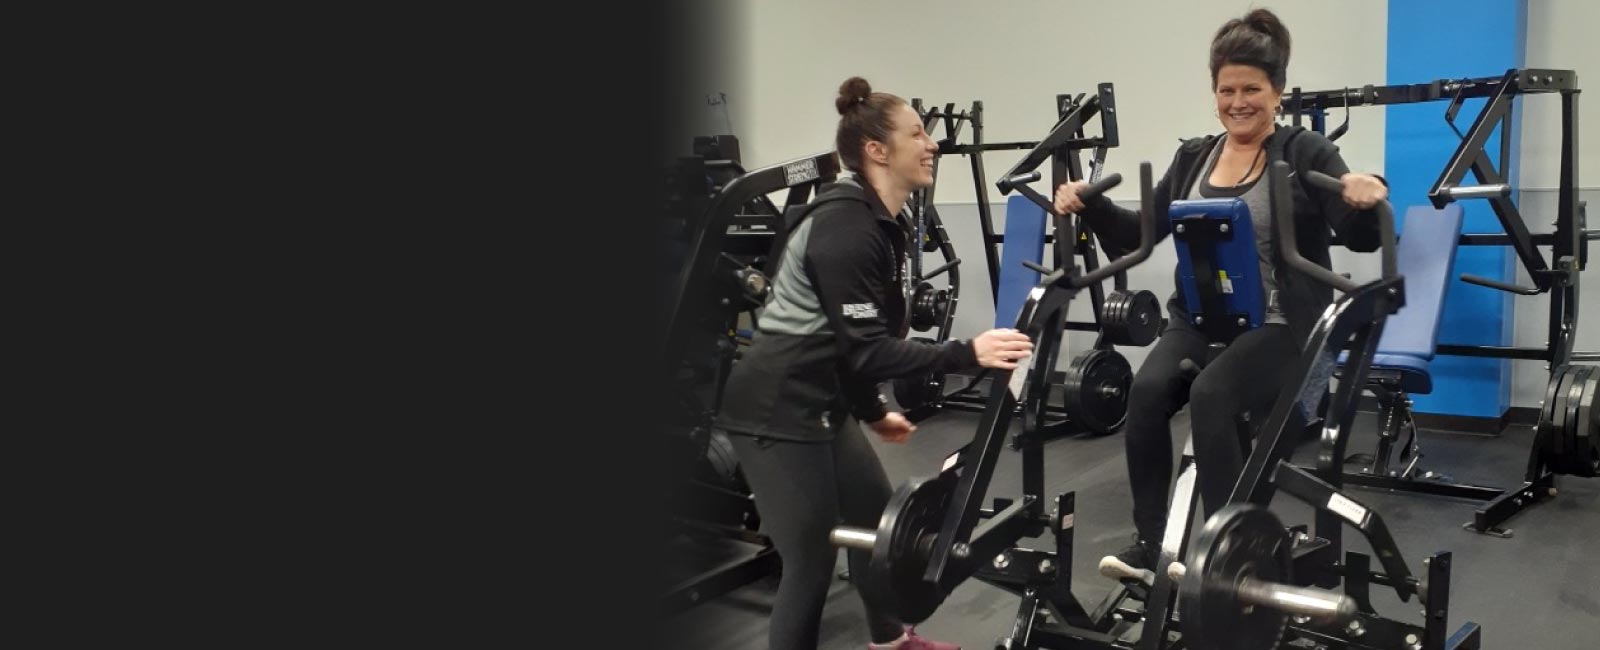 Personal trainer coaching a woman on an excercise bike - Train Hard Fitness  8180 Oswego Rd.  Liverpool, NY 13090  315-409-4764